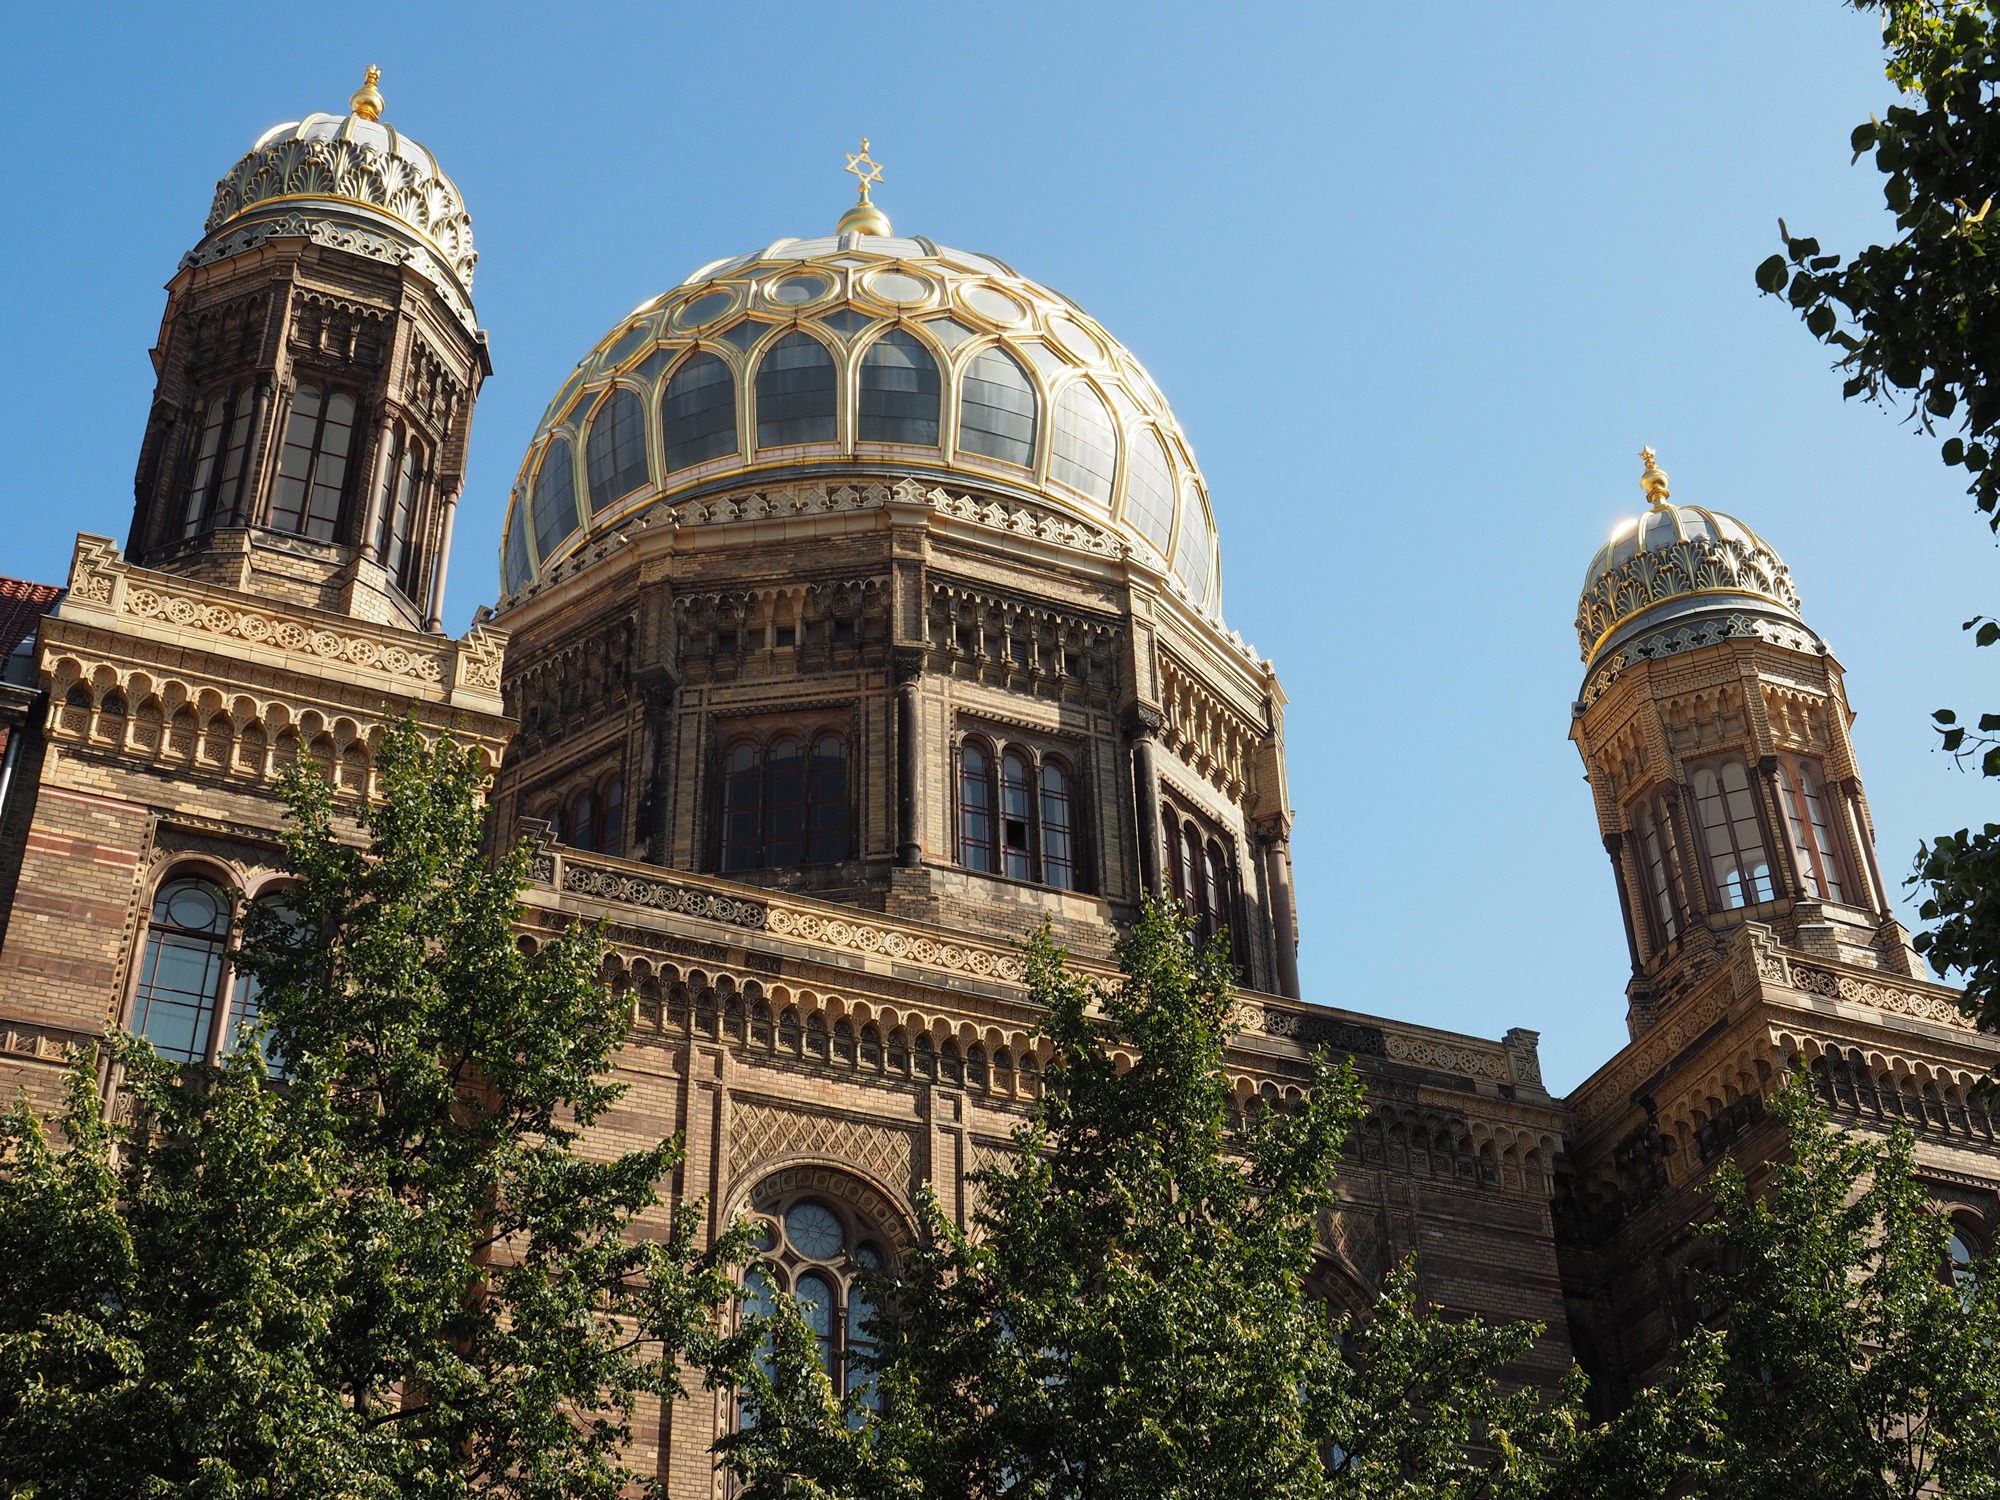 The dome of the "New Synagogue" in Berlin